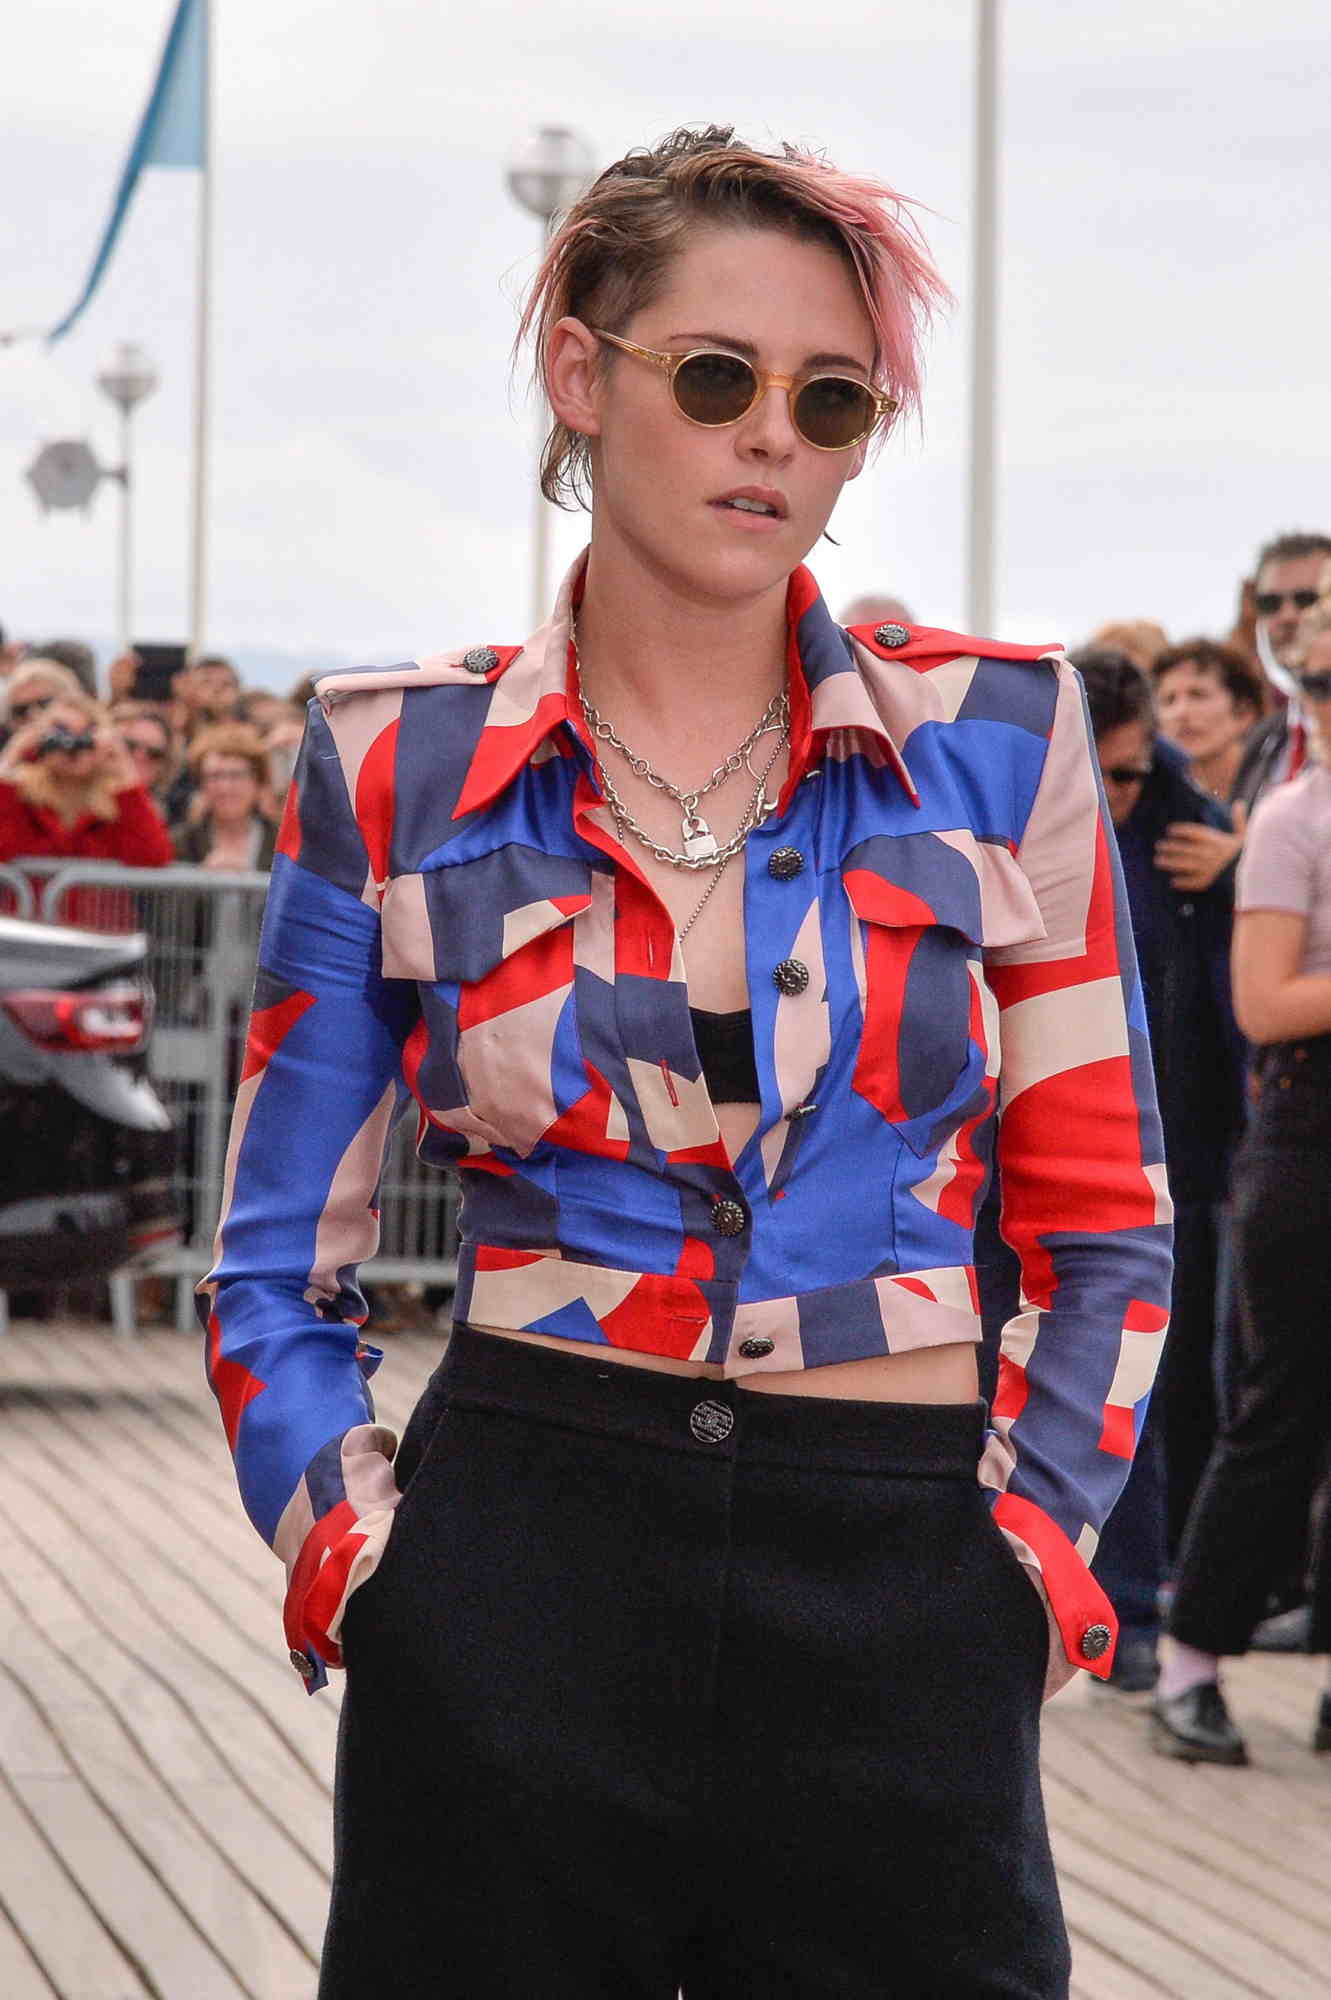 Kristen Stewart at 45th Deauville American Film Festival Honor Photocall – Sept 13th